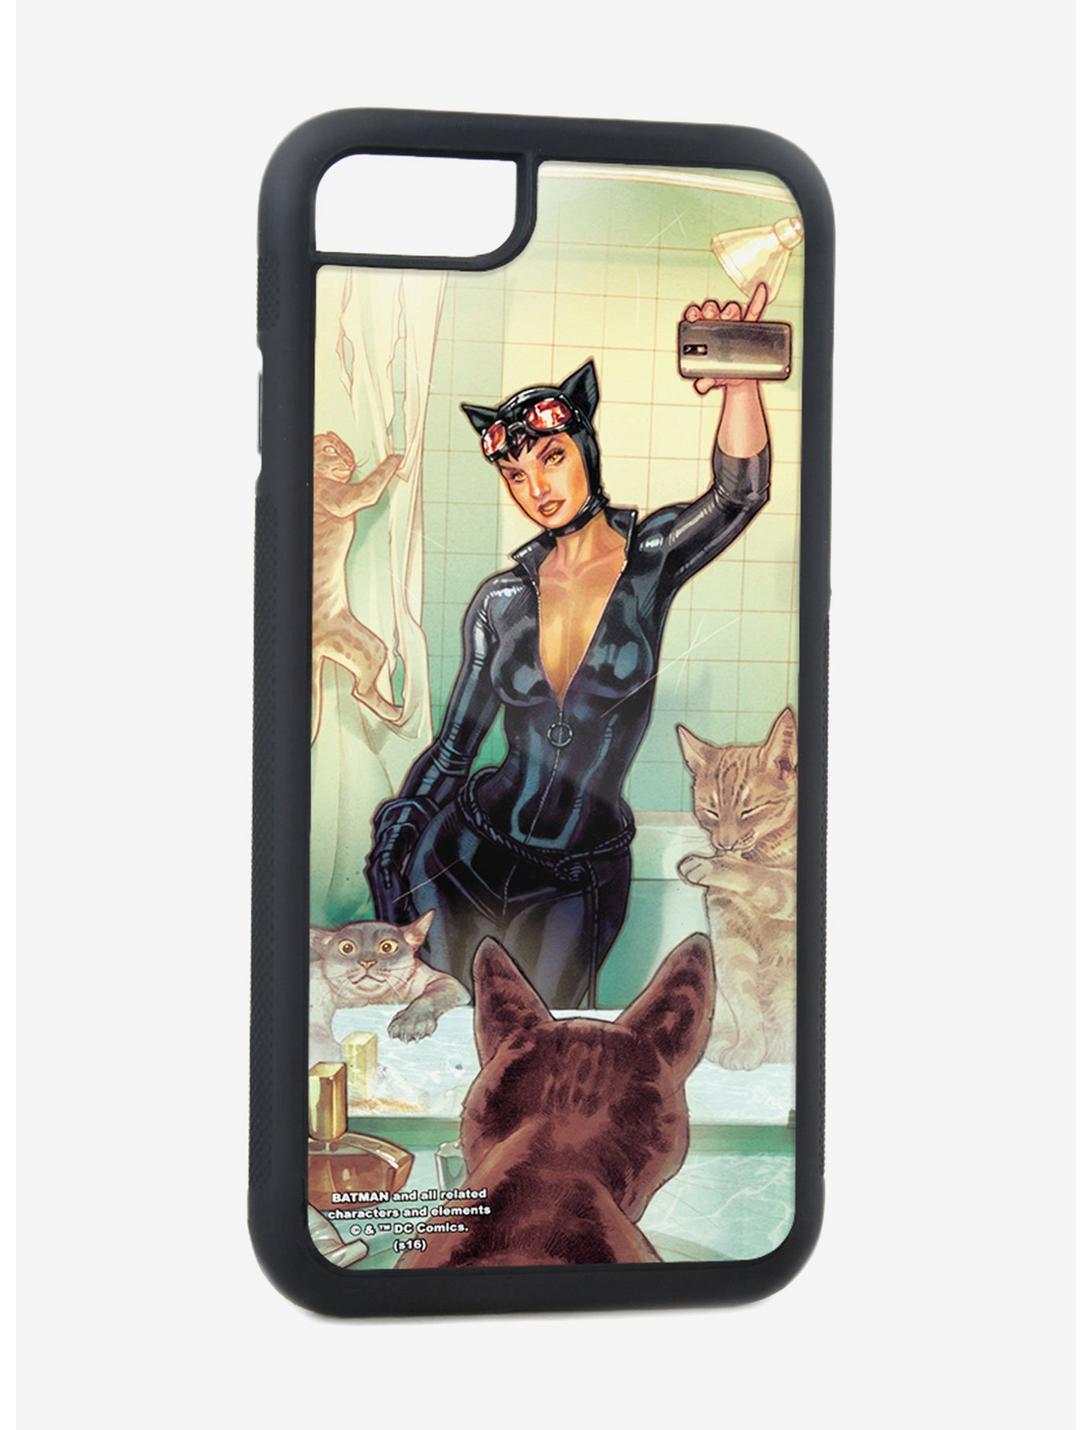 DC Comics Catwoman Issue 34 Bathroom Selfie Cats Variant Cover Pose iPhone XS Rubber Cell Phone Case, , hi-res